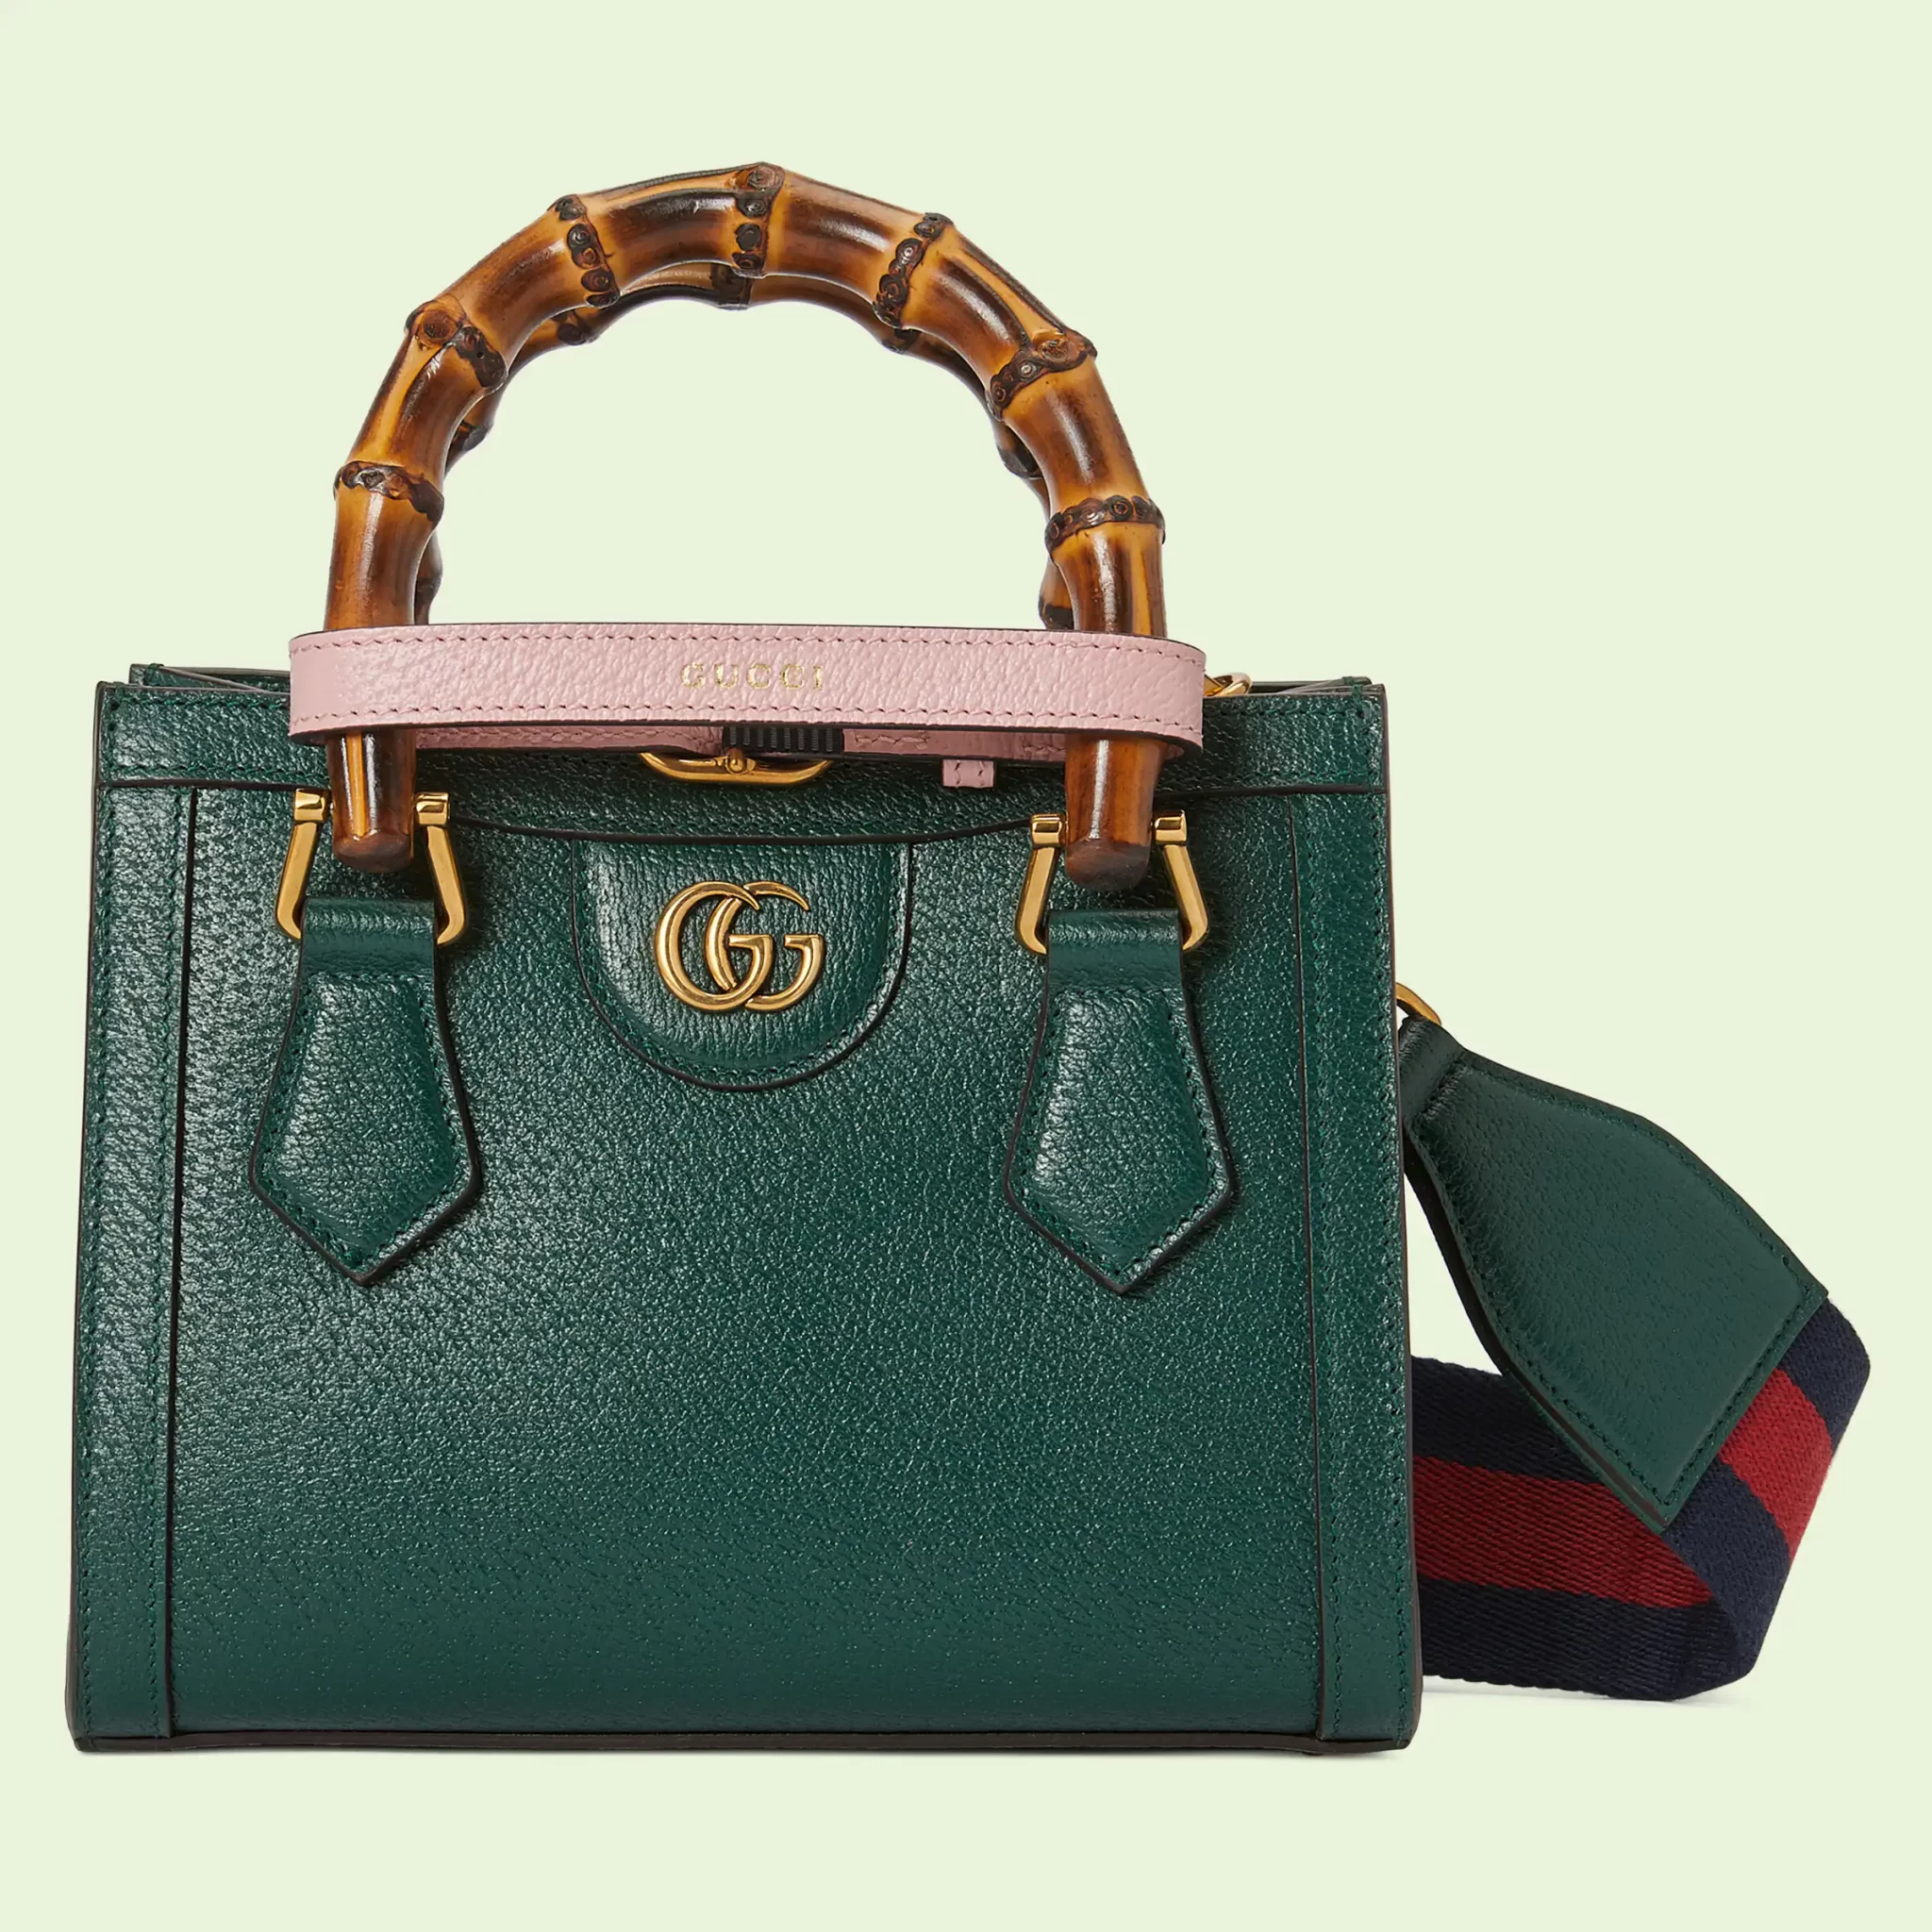 voering stel voor Veeg Gucci Bags Price List Reference Guide (Updated 2022) - Spotted Fashion